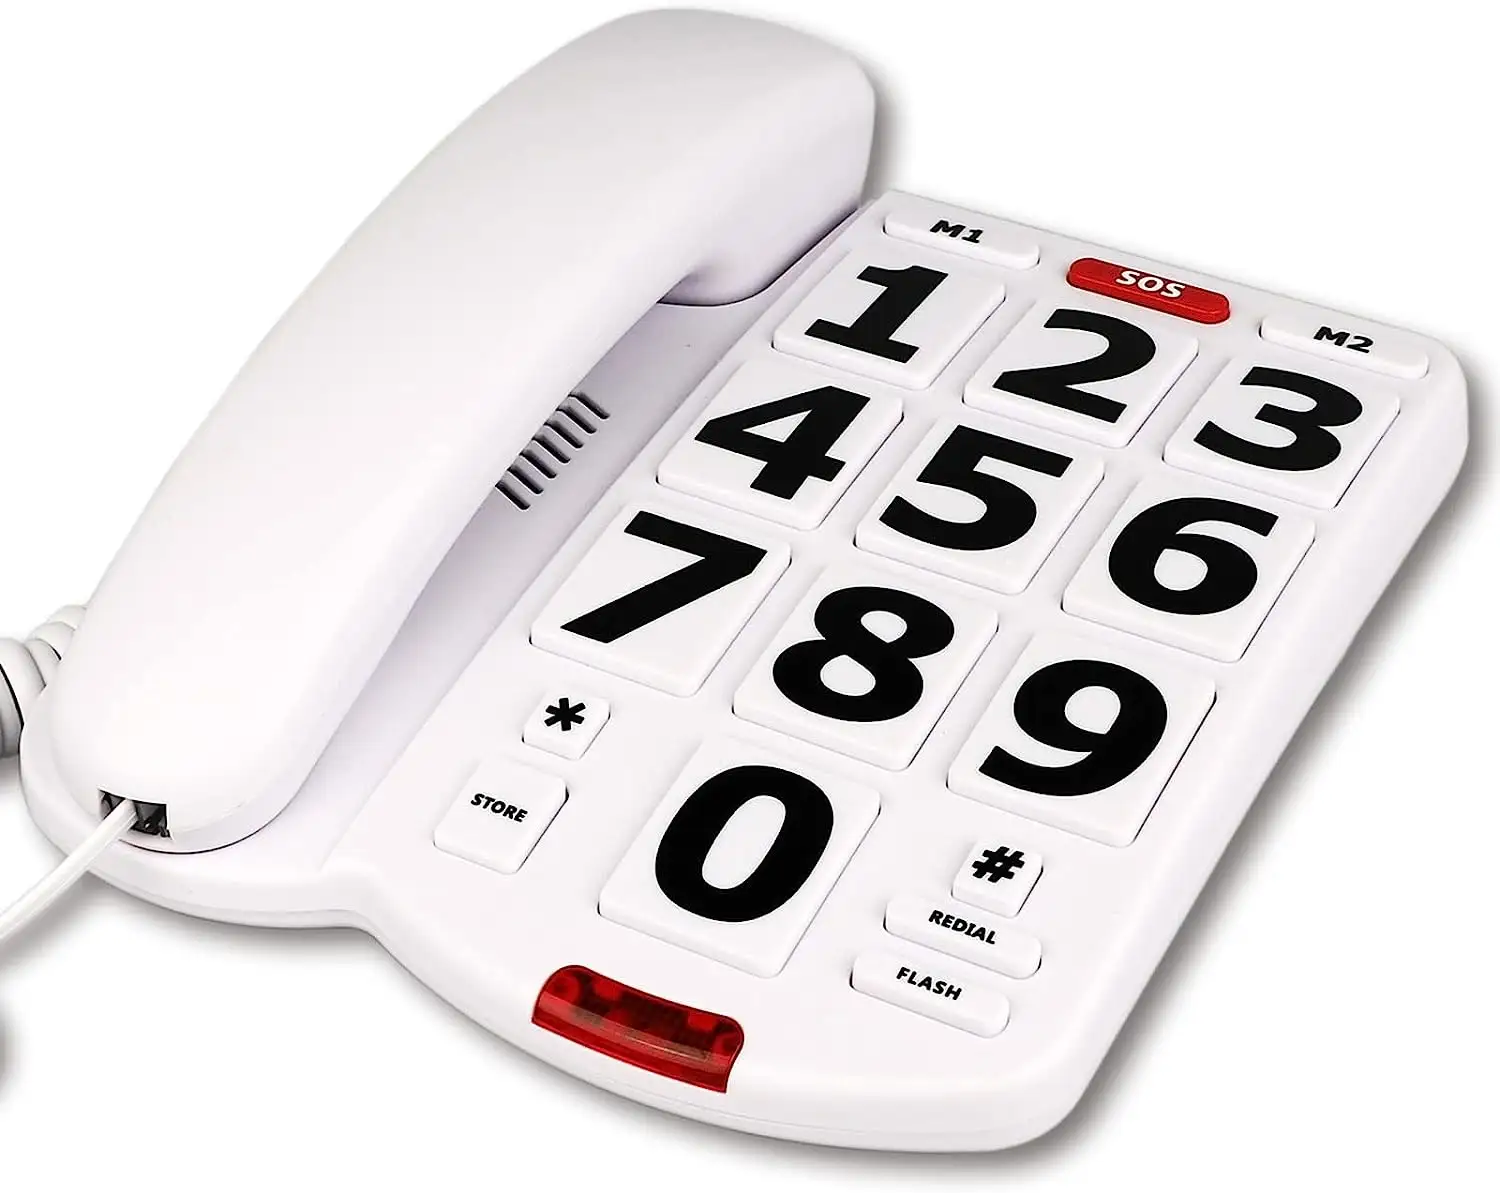 Big Button Phone for Land Line Phones for Visually Impaired Seniors, with Extra Loud Ringer, Large Easy Buttons